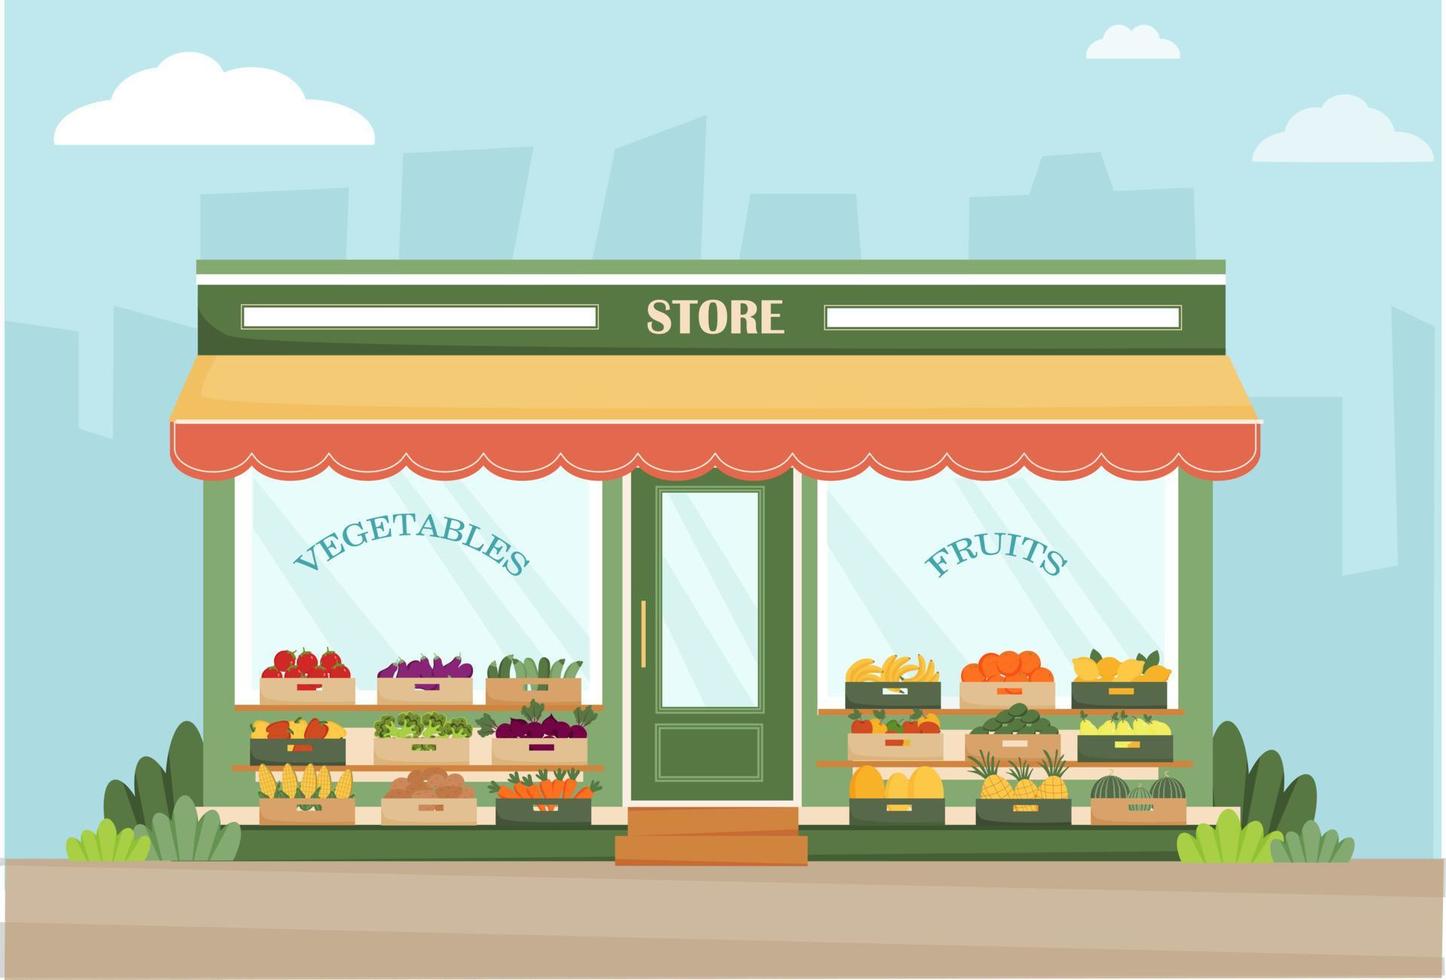 Fruit and vegetable store on the street. Fresh organic food products. Fruit and vegetable in boxes. Farm products. Cucumber, tomato, potato, carrot, corn, banana, apple, pear. Vector illustration.